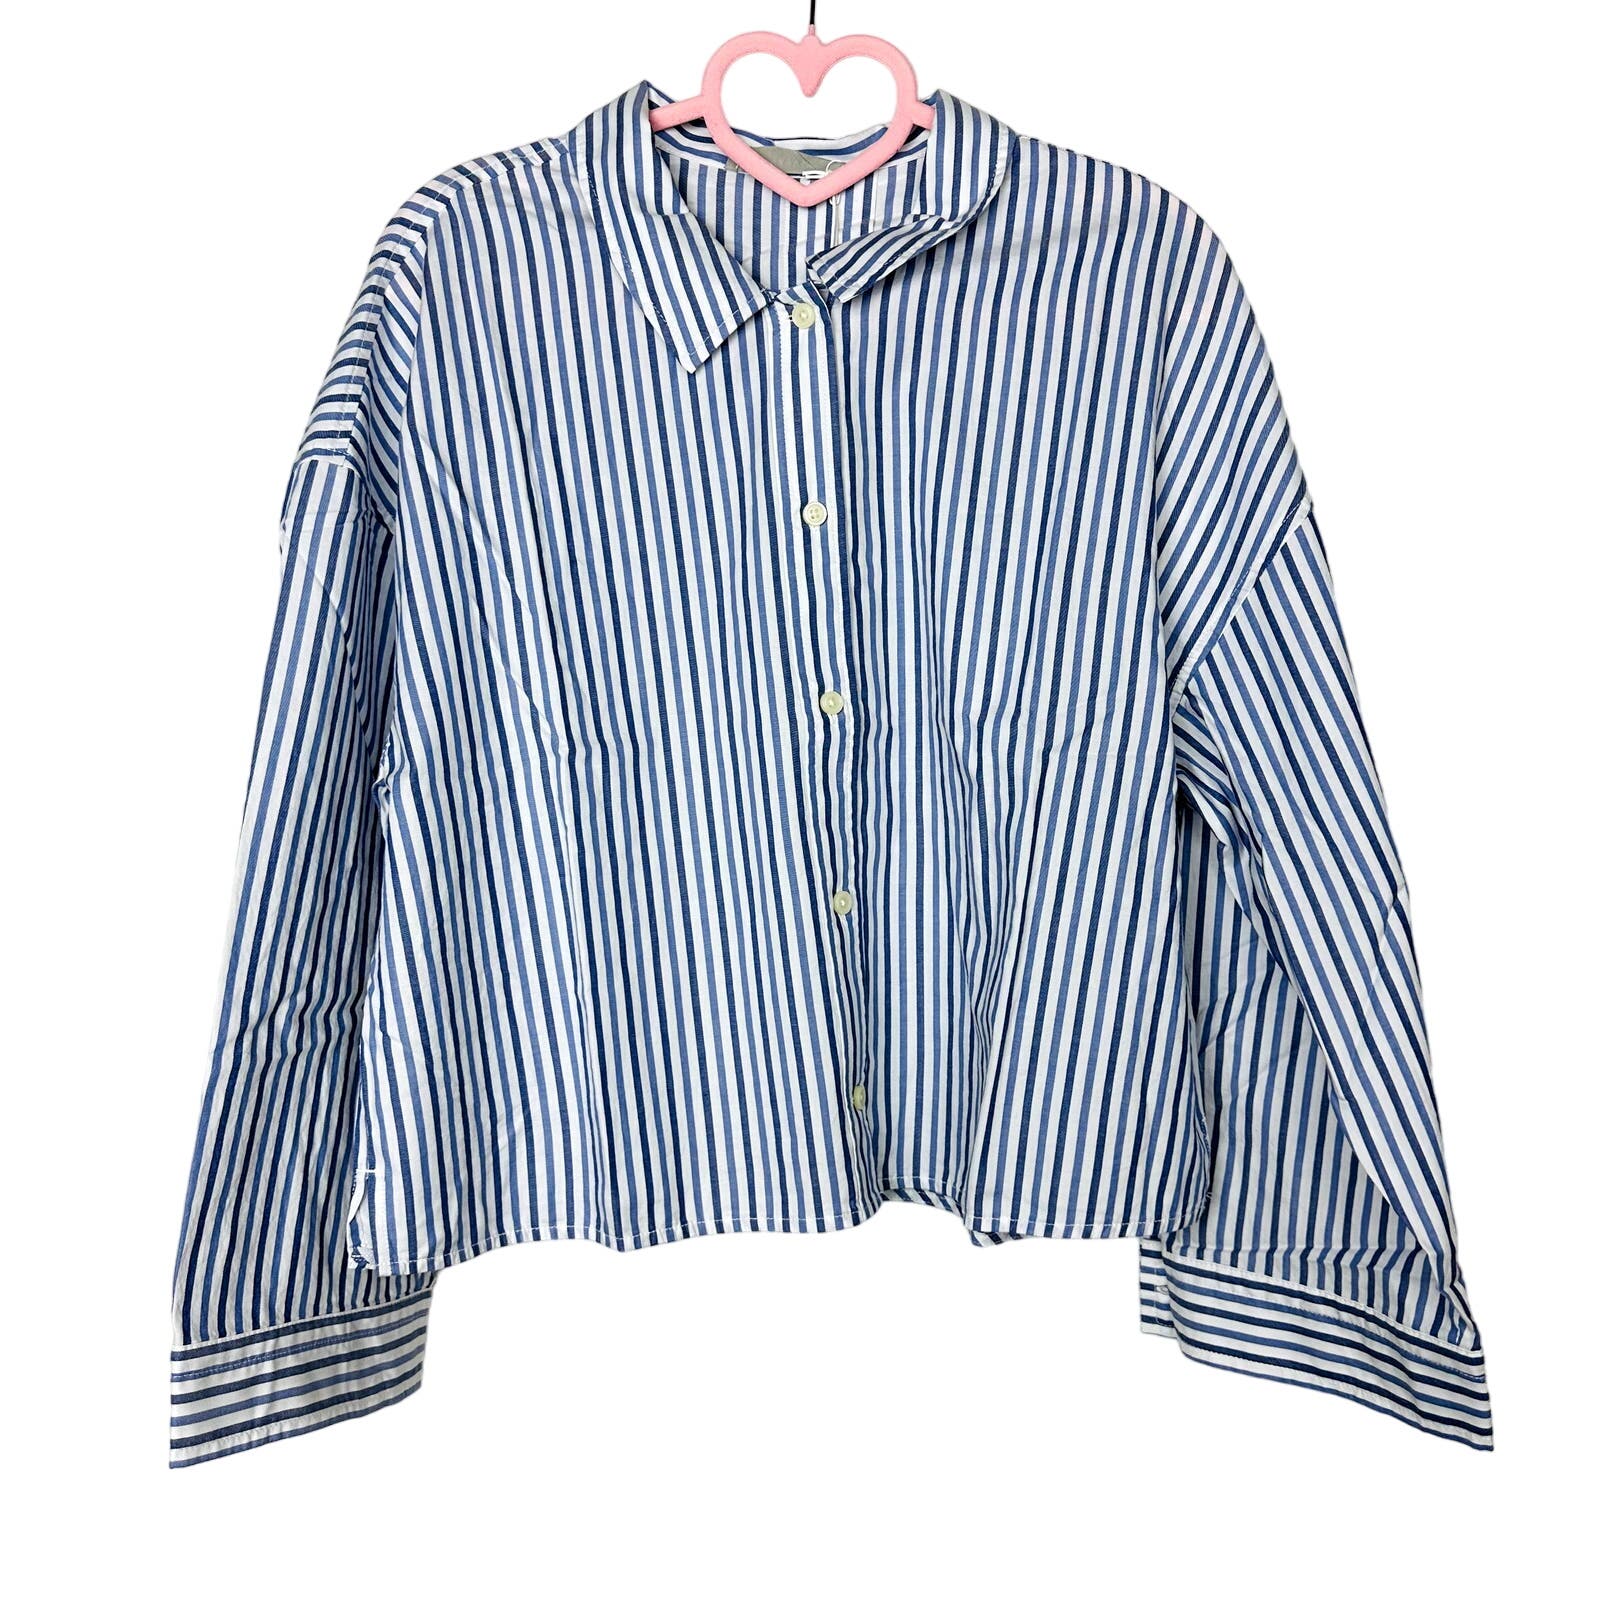 Everlane NWT The Woven P.J. Longsleeve Button Front Striped Top Blue White Size Small